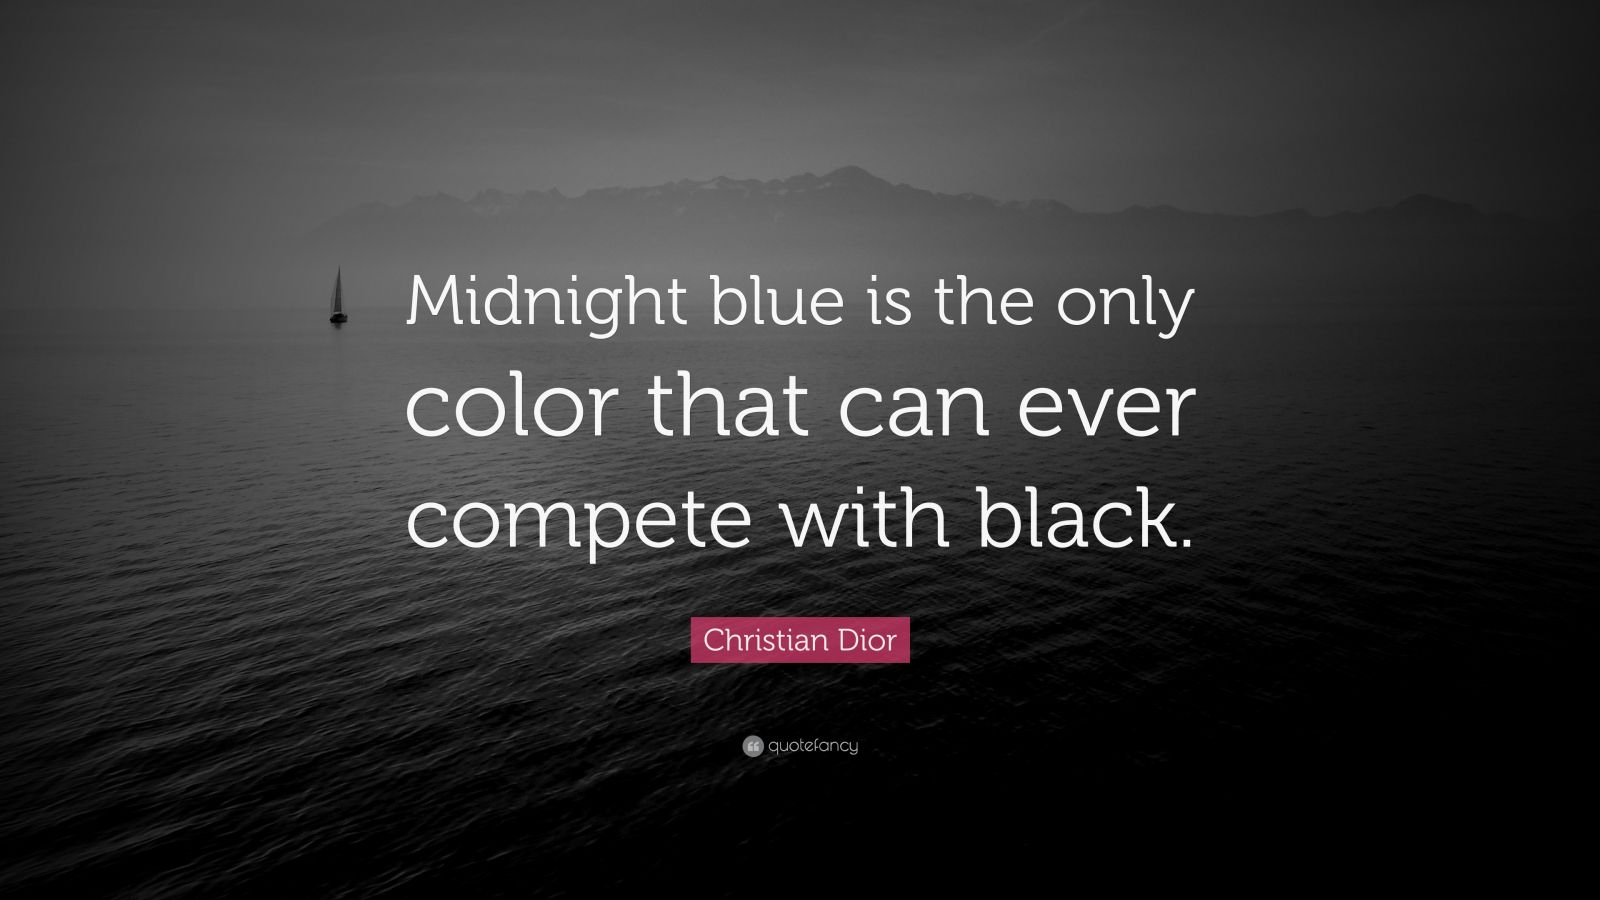 Christian Dior Quote “Midnight blue is the only color that can ...